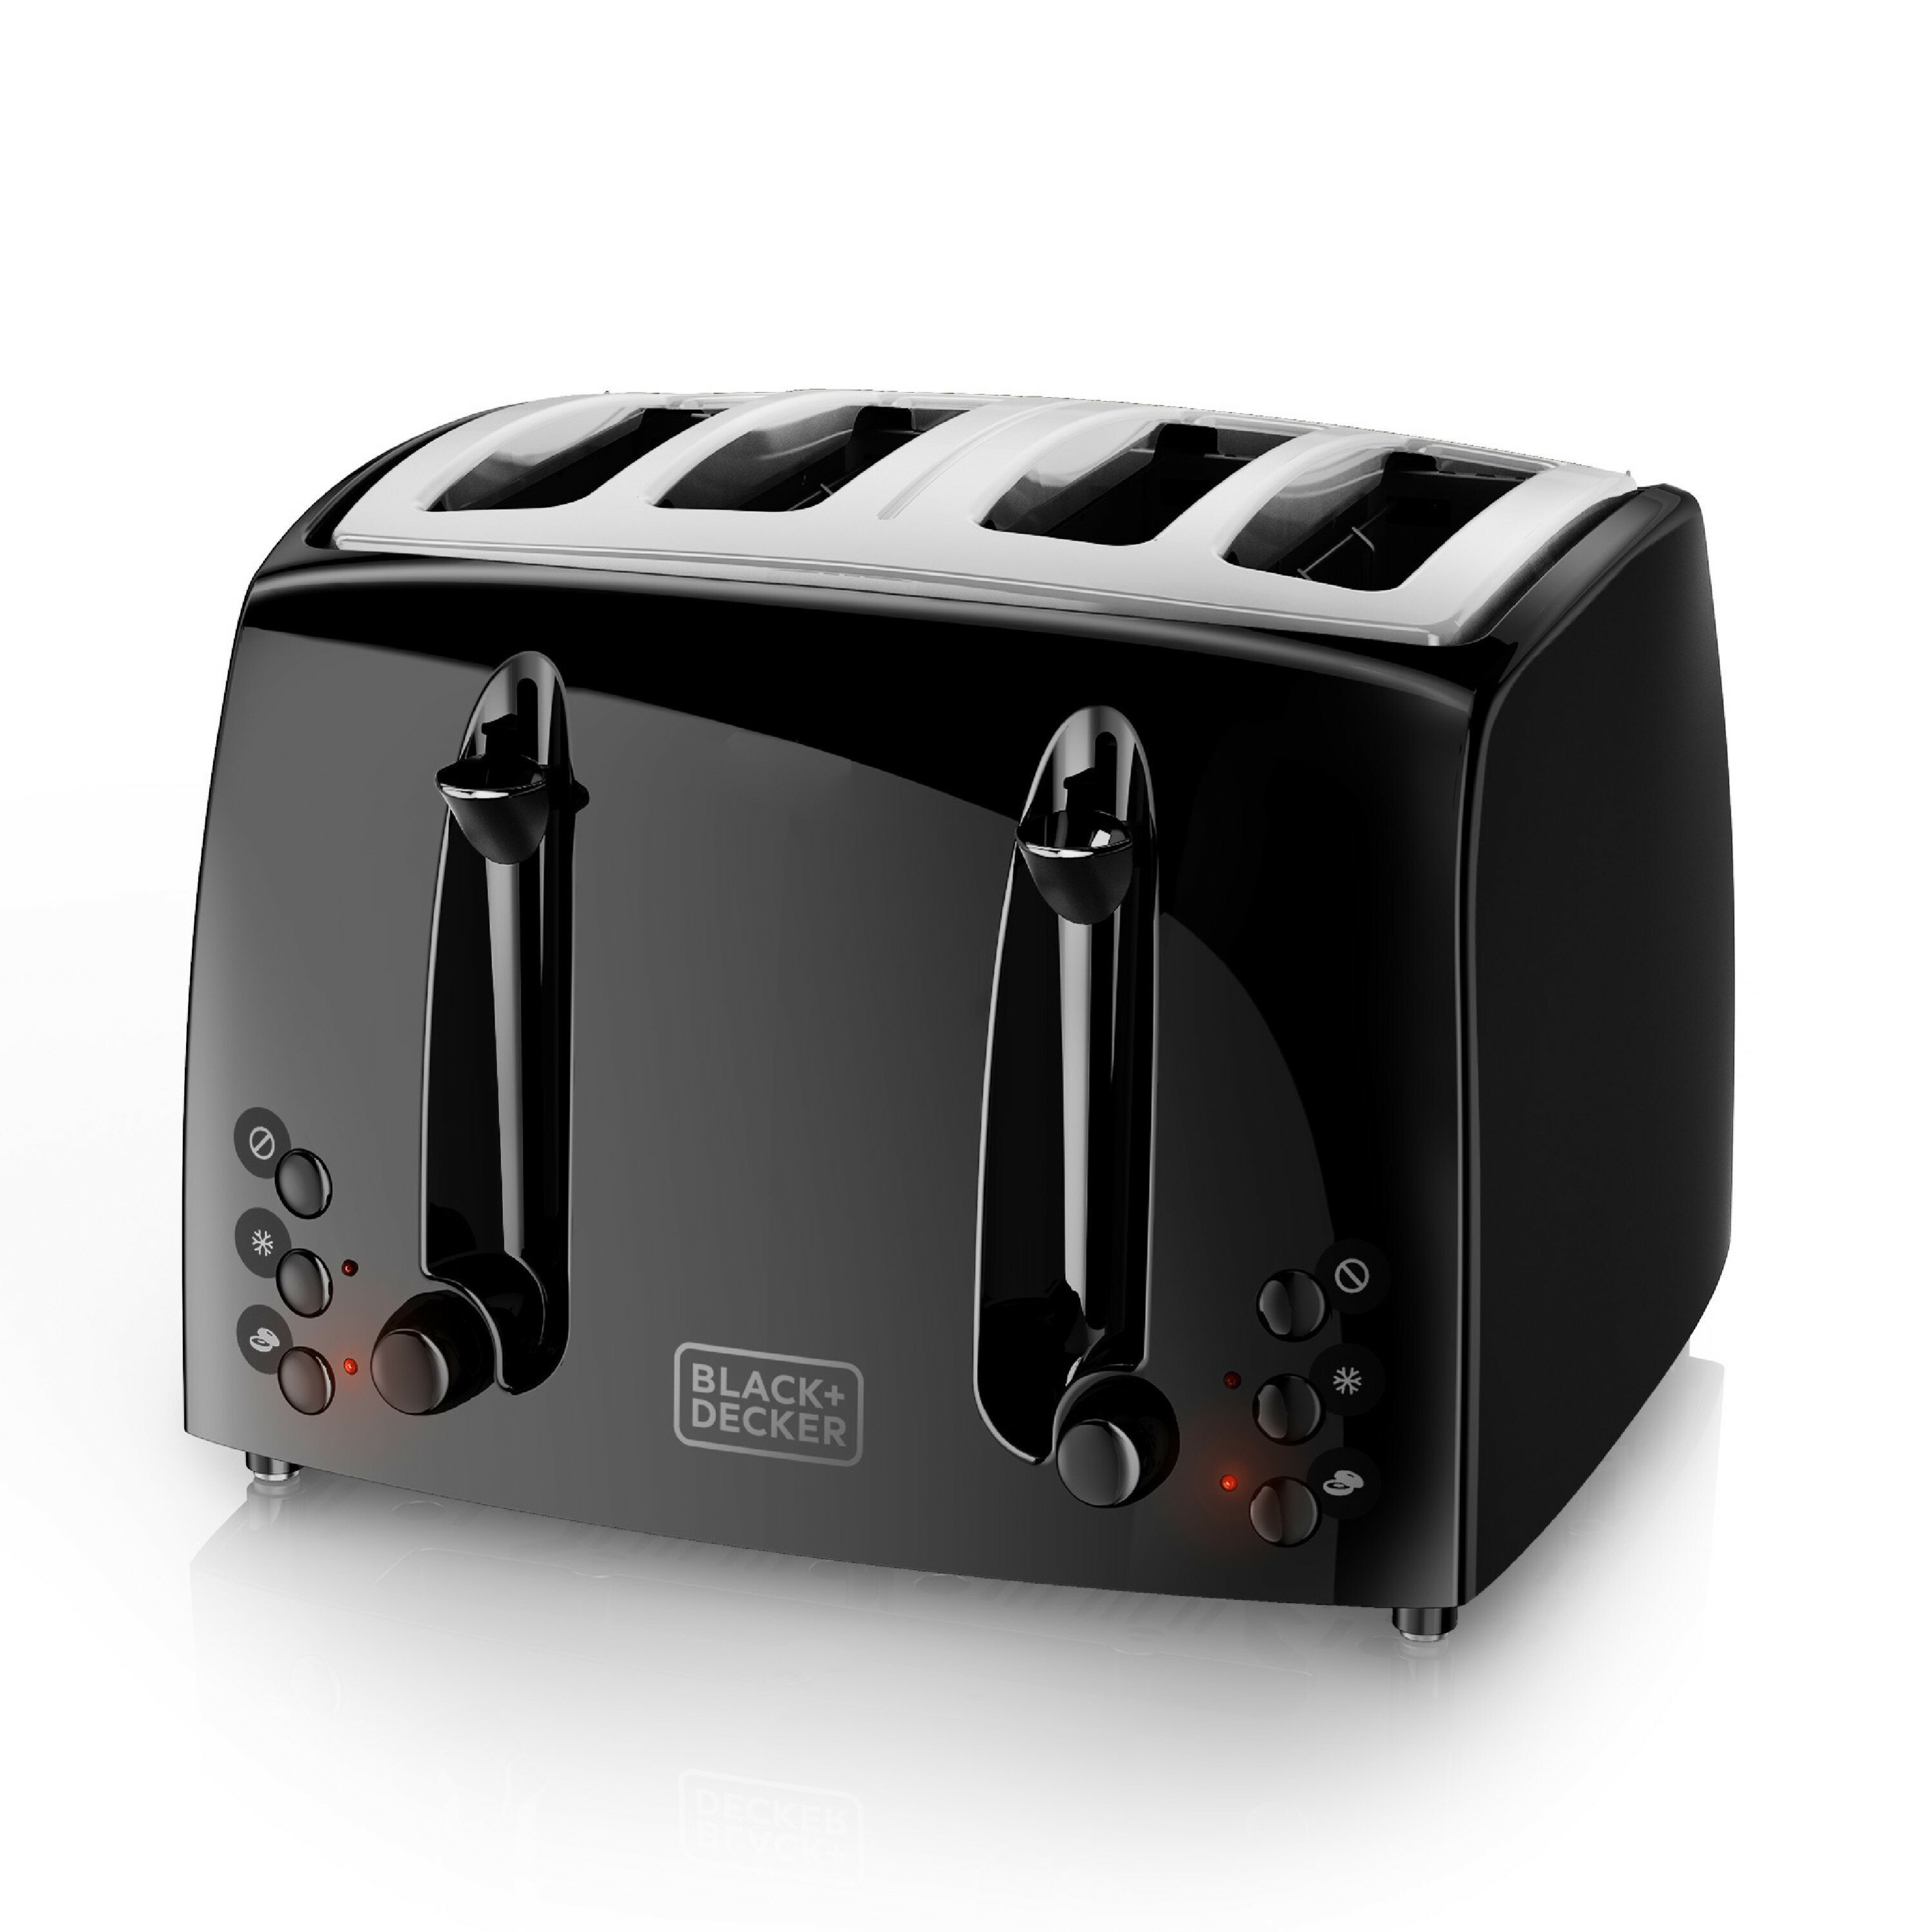 Proctor Silex 4-Slice Black Wide Slot Toaster with Crumb Tray and